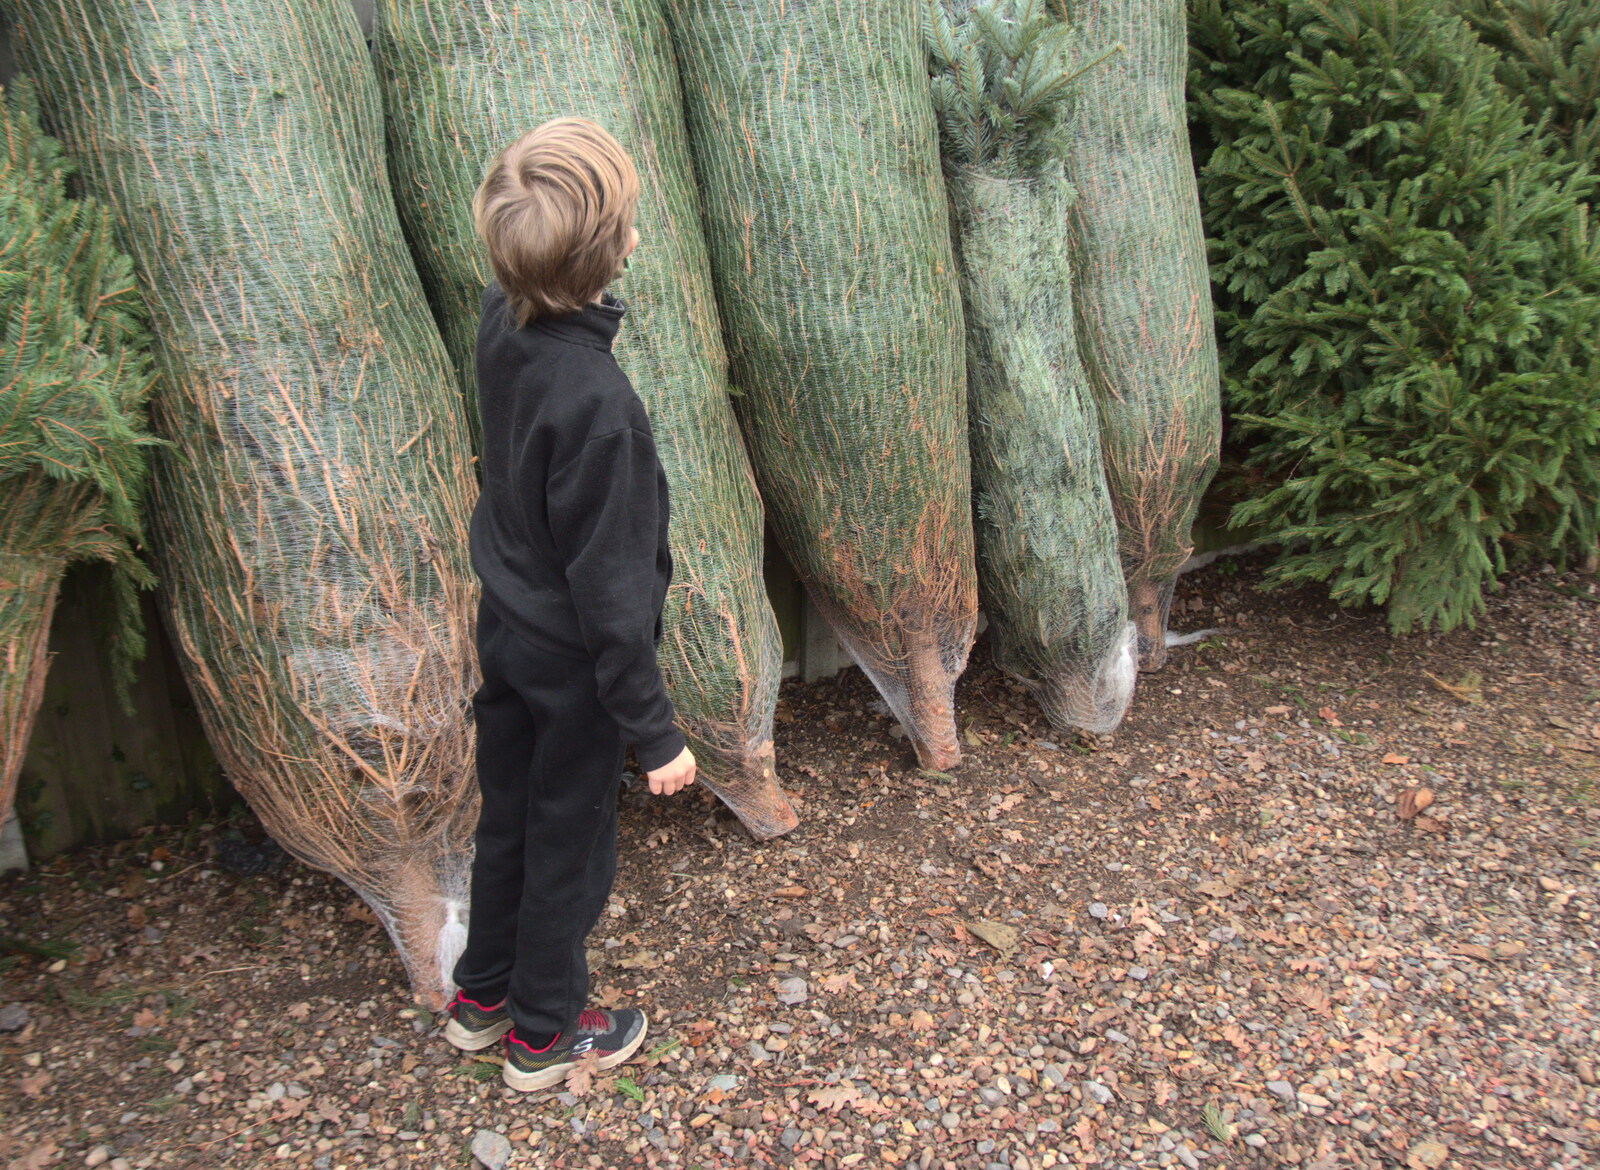 Harry looks up at tall trees at the garden centre from Frosty Rides and a Christmas Tree, Diss Garden Centre, Diss, Norfolk - 29th November 2020